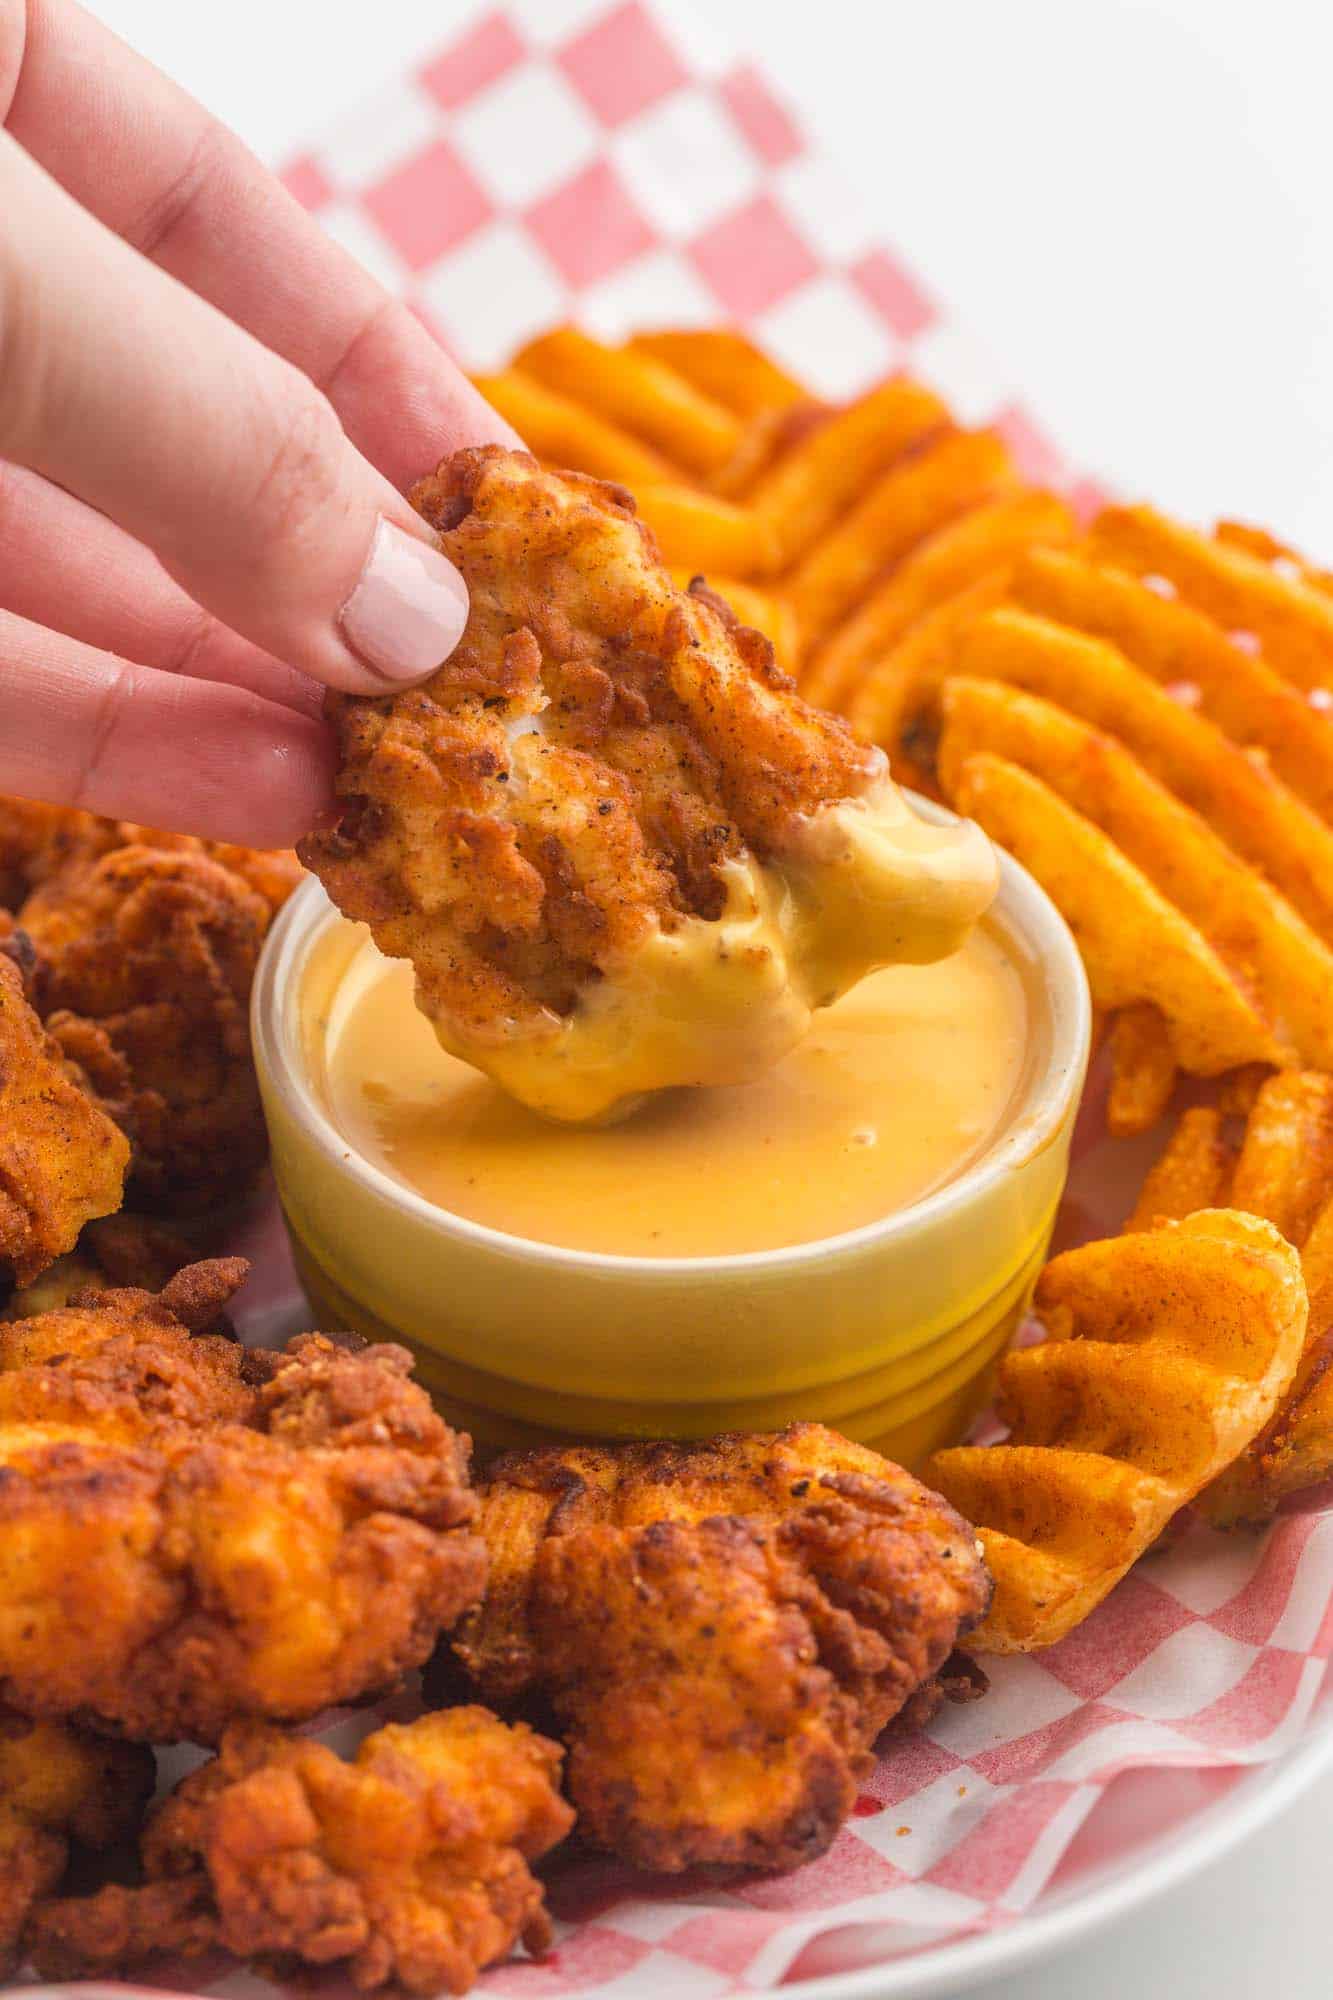 a plate lined with red checkered paper filled with copycat chick fil a nuggets and waffle fries. a hand is dipping a nugget into creamy chick fil a sauce